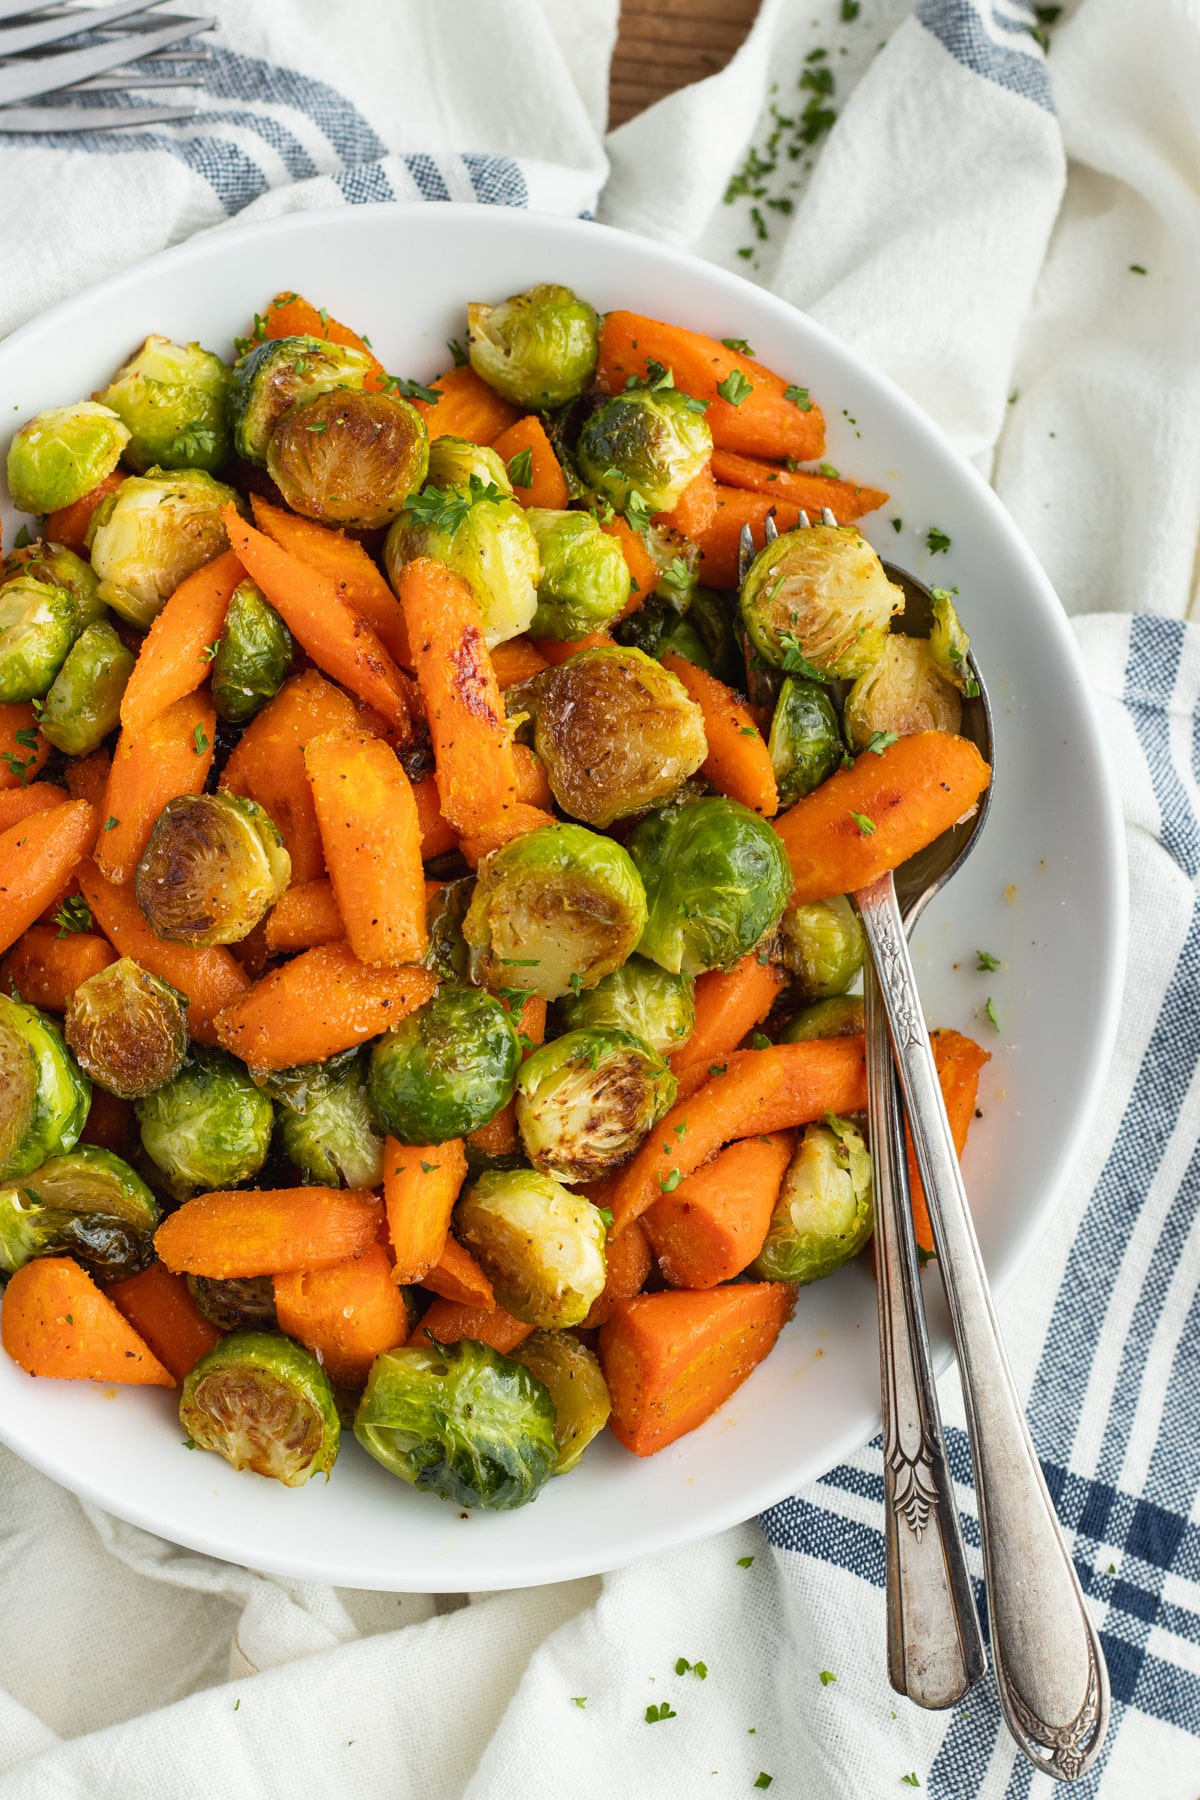 This is a picture of a plate filled with roasted Brussels sprouts and carrots with hot honey.